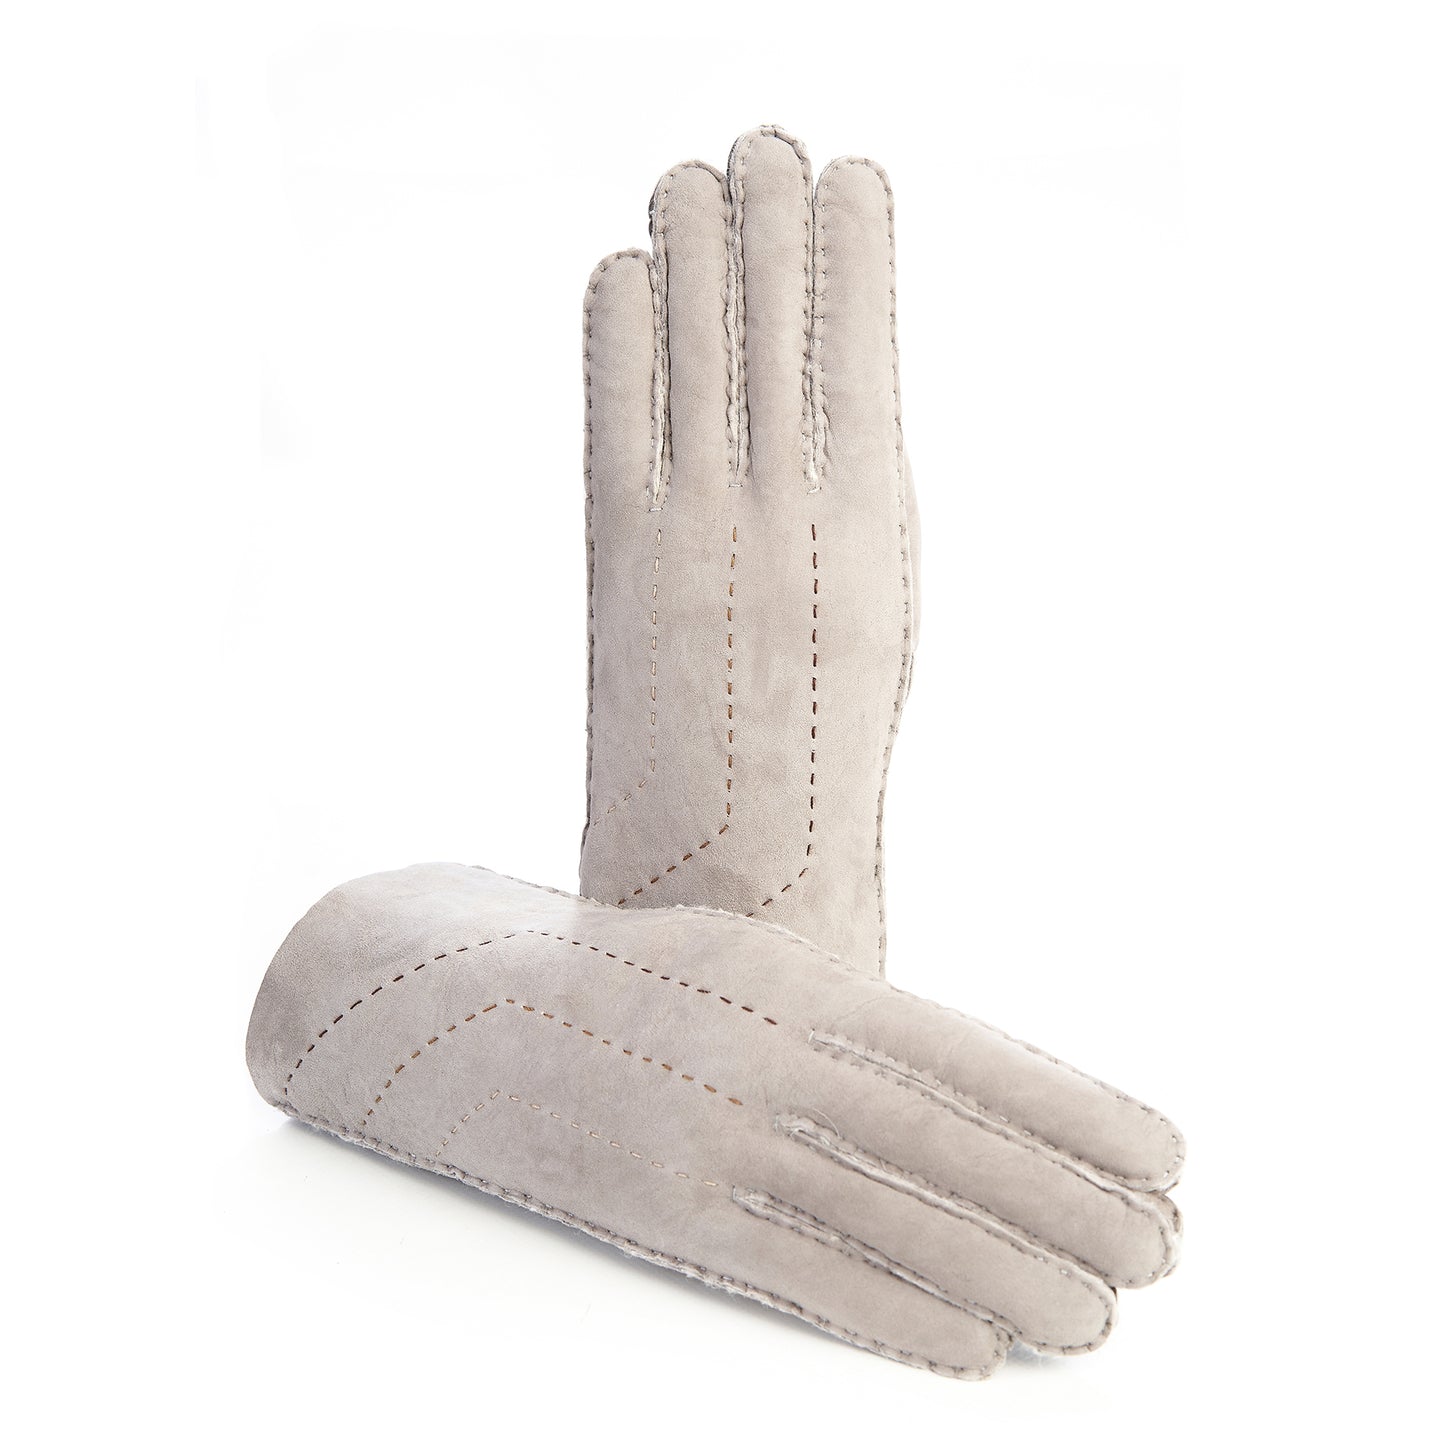 Women's lambskin gloves with hand stitched details on top color pearl grey